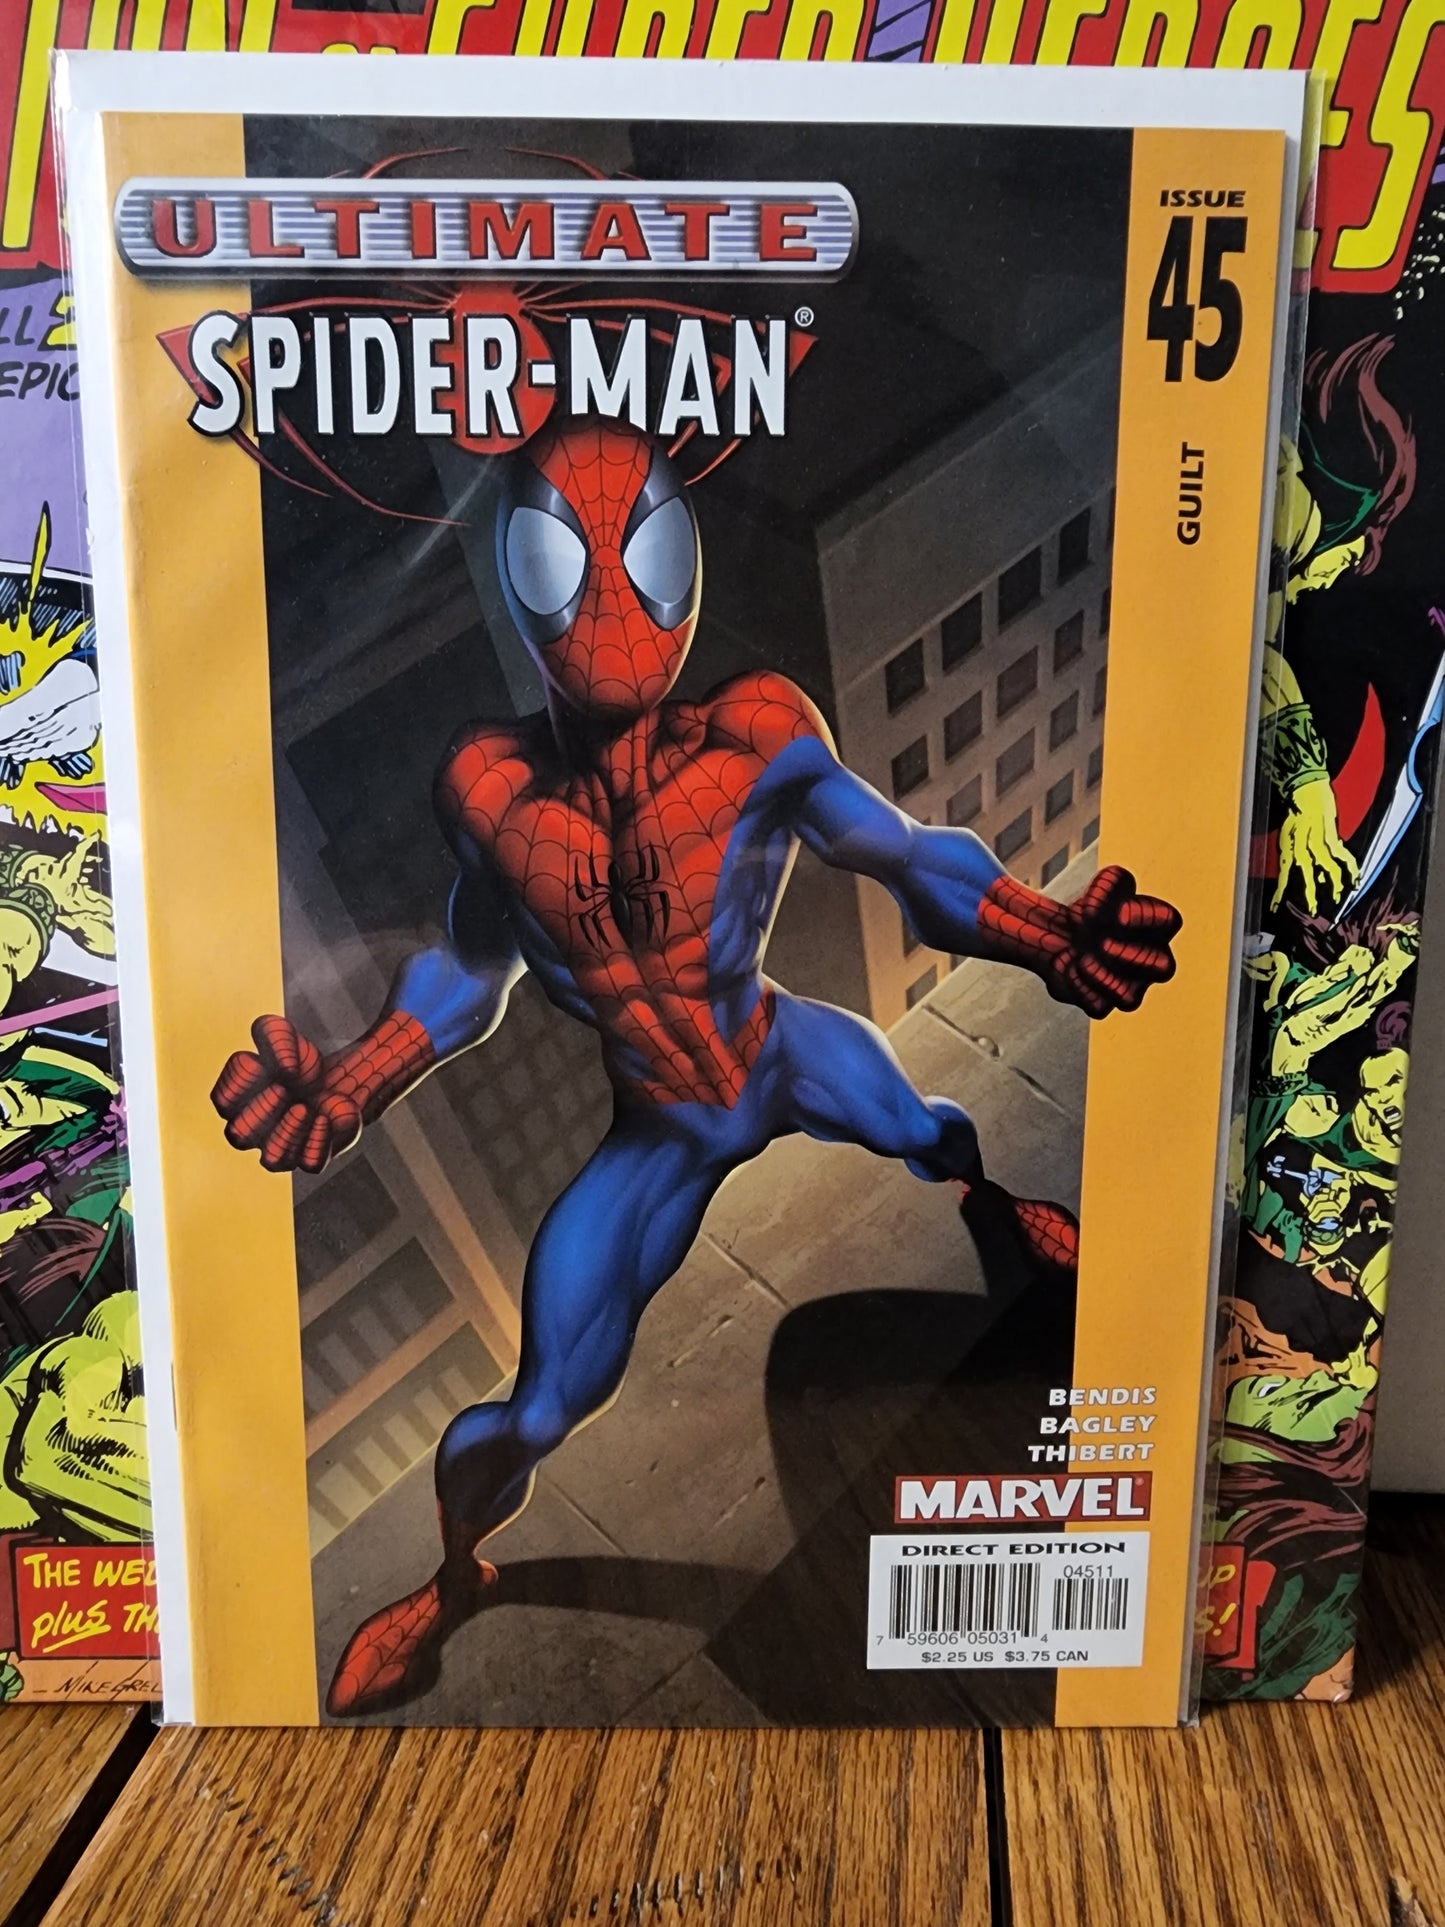 Ultimate Spider-Man #45 (VF/NM)